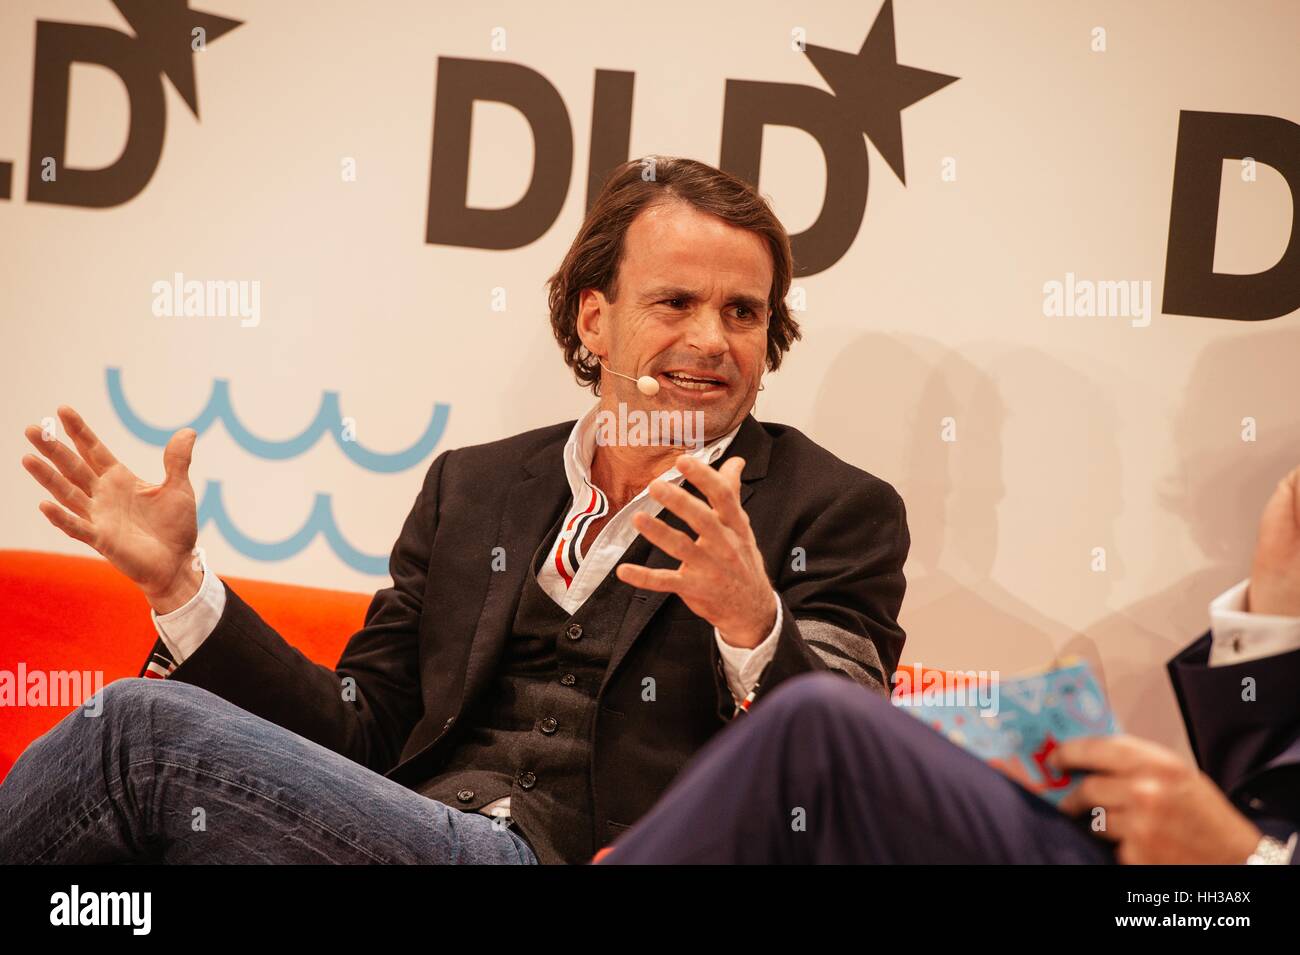 Munich, Germany. 16th Jan, 2017. Patrick Healy (Hellman & Friedman) gestures while spaking on a panel discussion during the DLD17 (Digital-Life-Design) Conference at the Alte Bayerische Staatsbank on January 16, 2017 in Munich, Germany. DLD is Europe's big conference of innovation, digitization, science and culture, which connects business, creative and social leaders, opinion formers and influencers for crossover conversation and inspiration. (Photo: picture alliance/Jan Haas) | usage worldwide/dpa/Alamy Live News Stock Photo